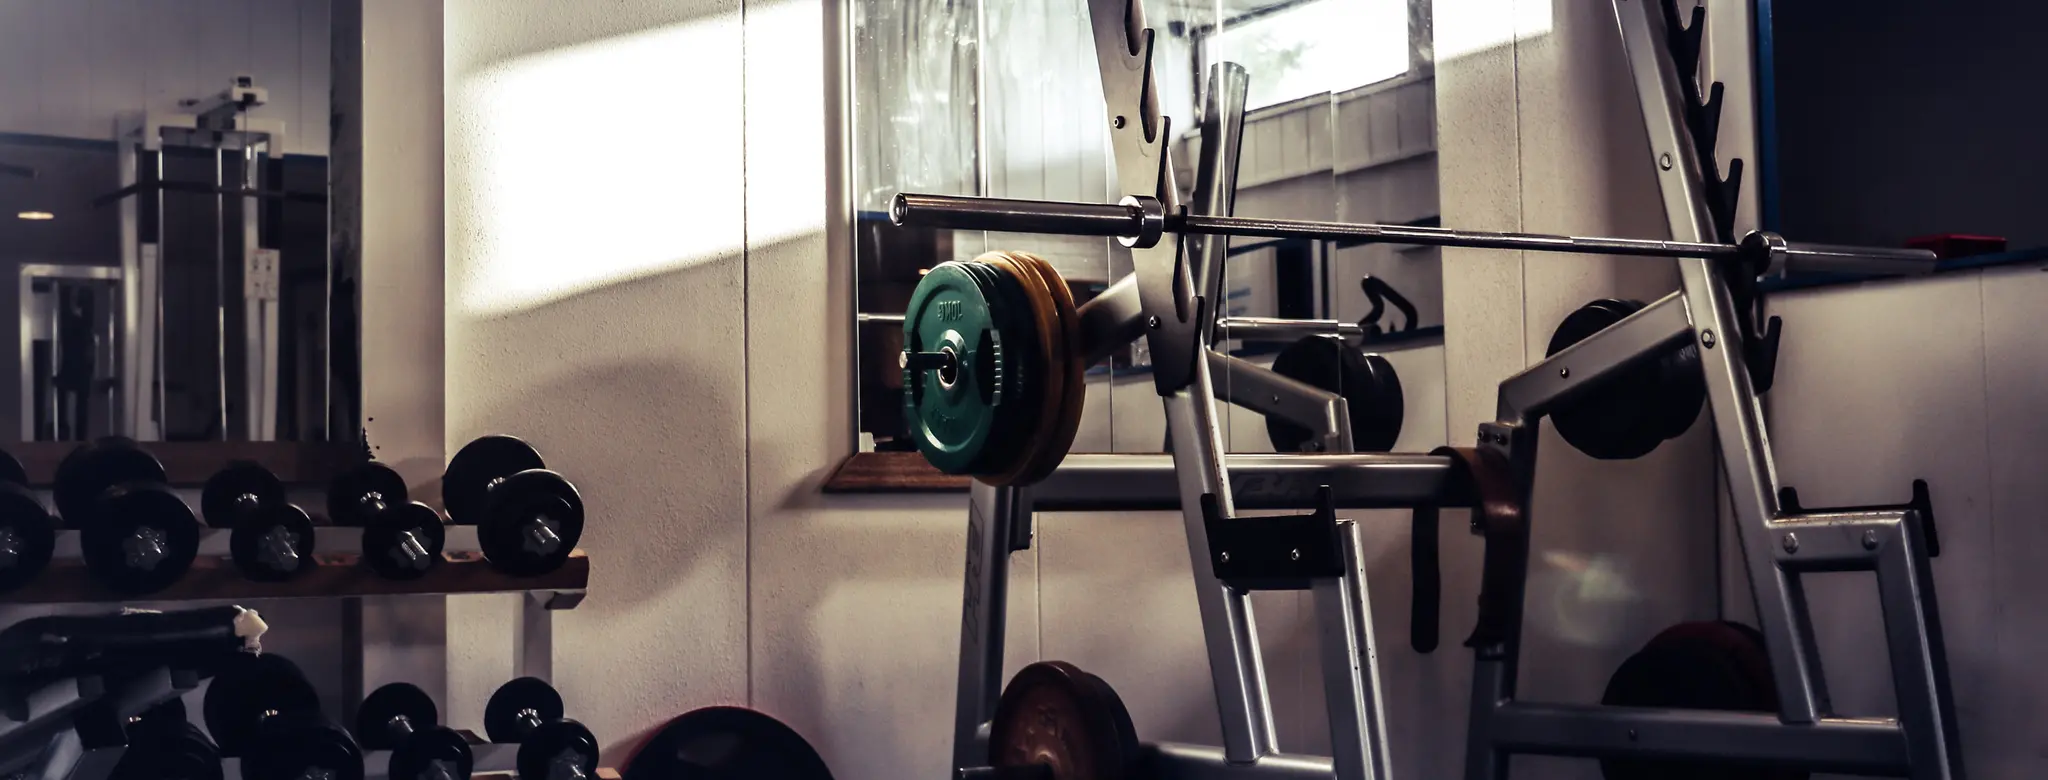 Abandoned weights in a dark, empty gym